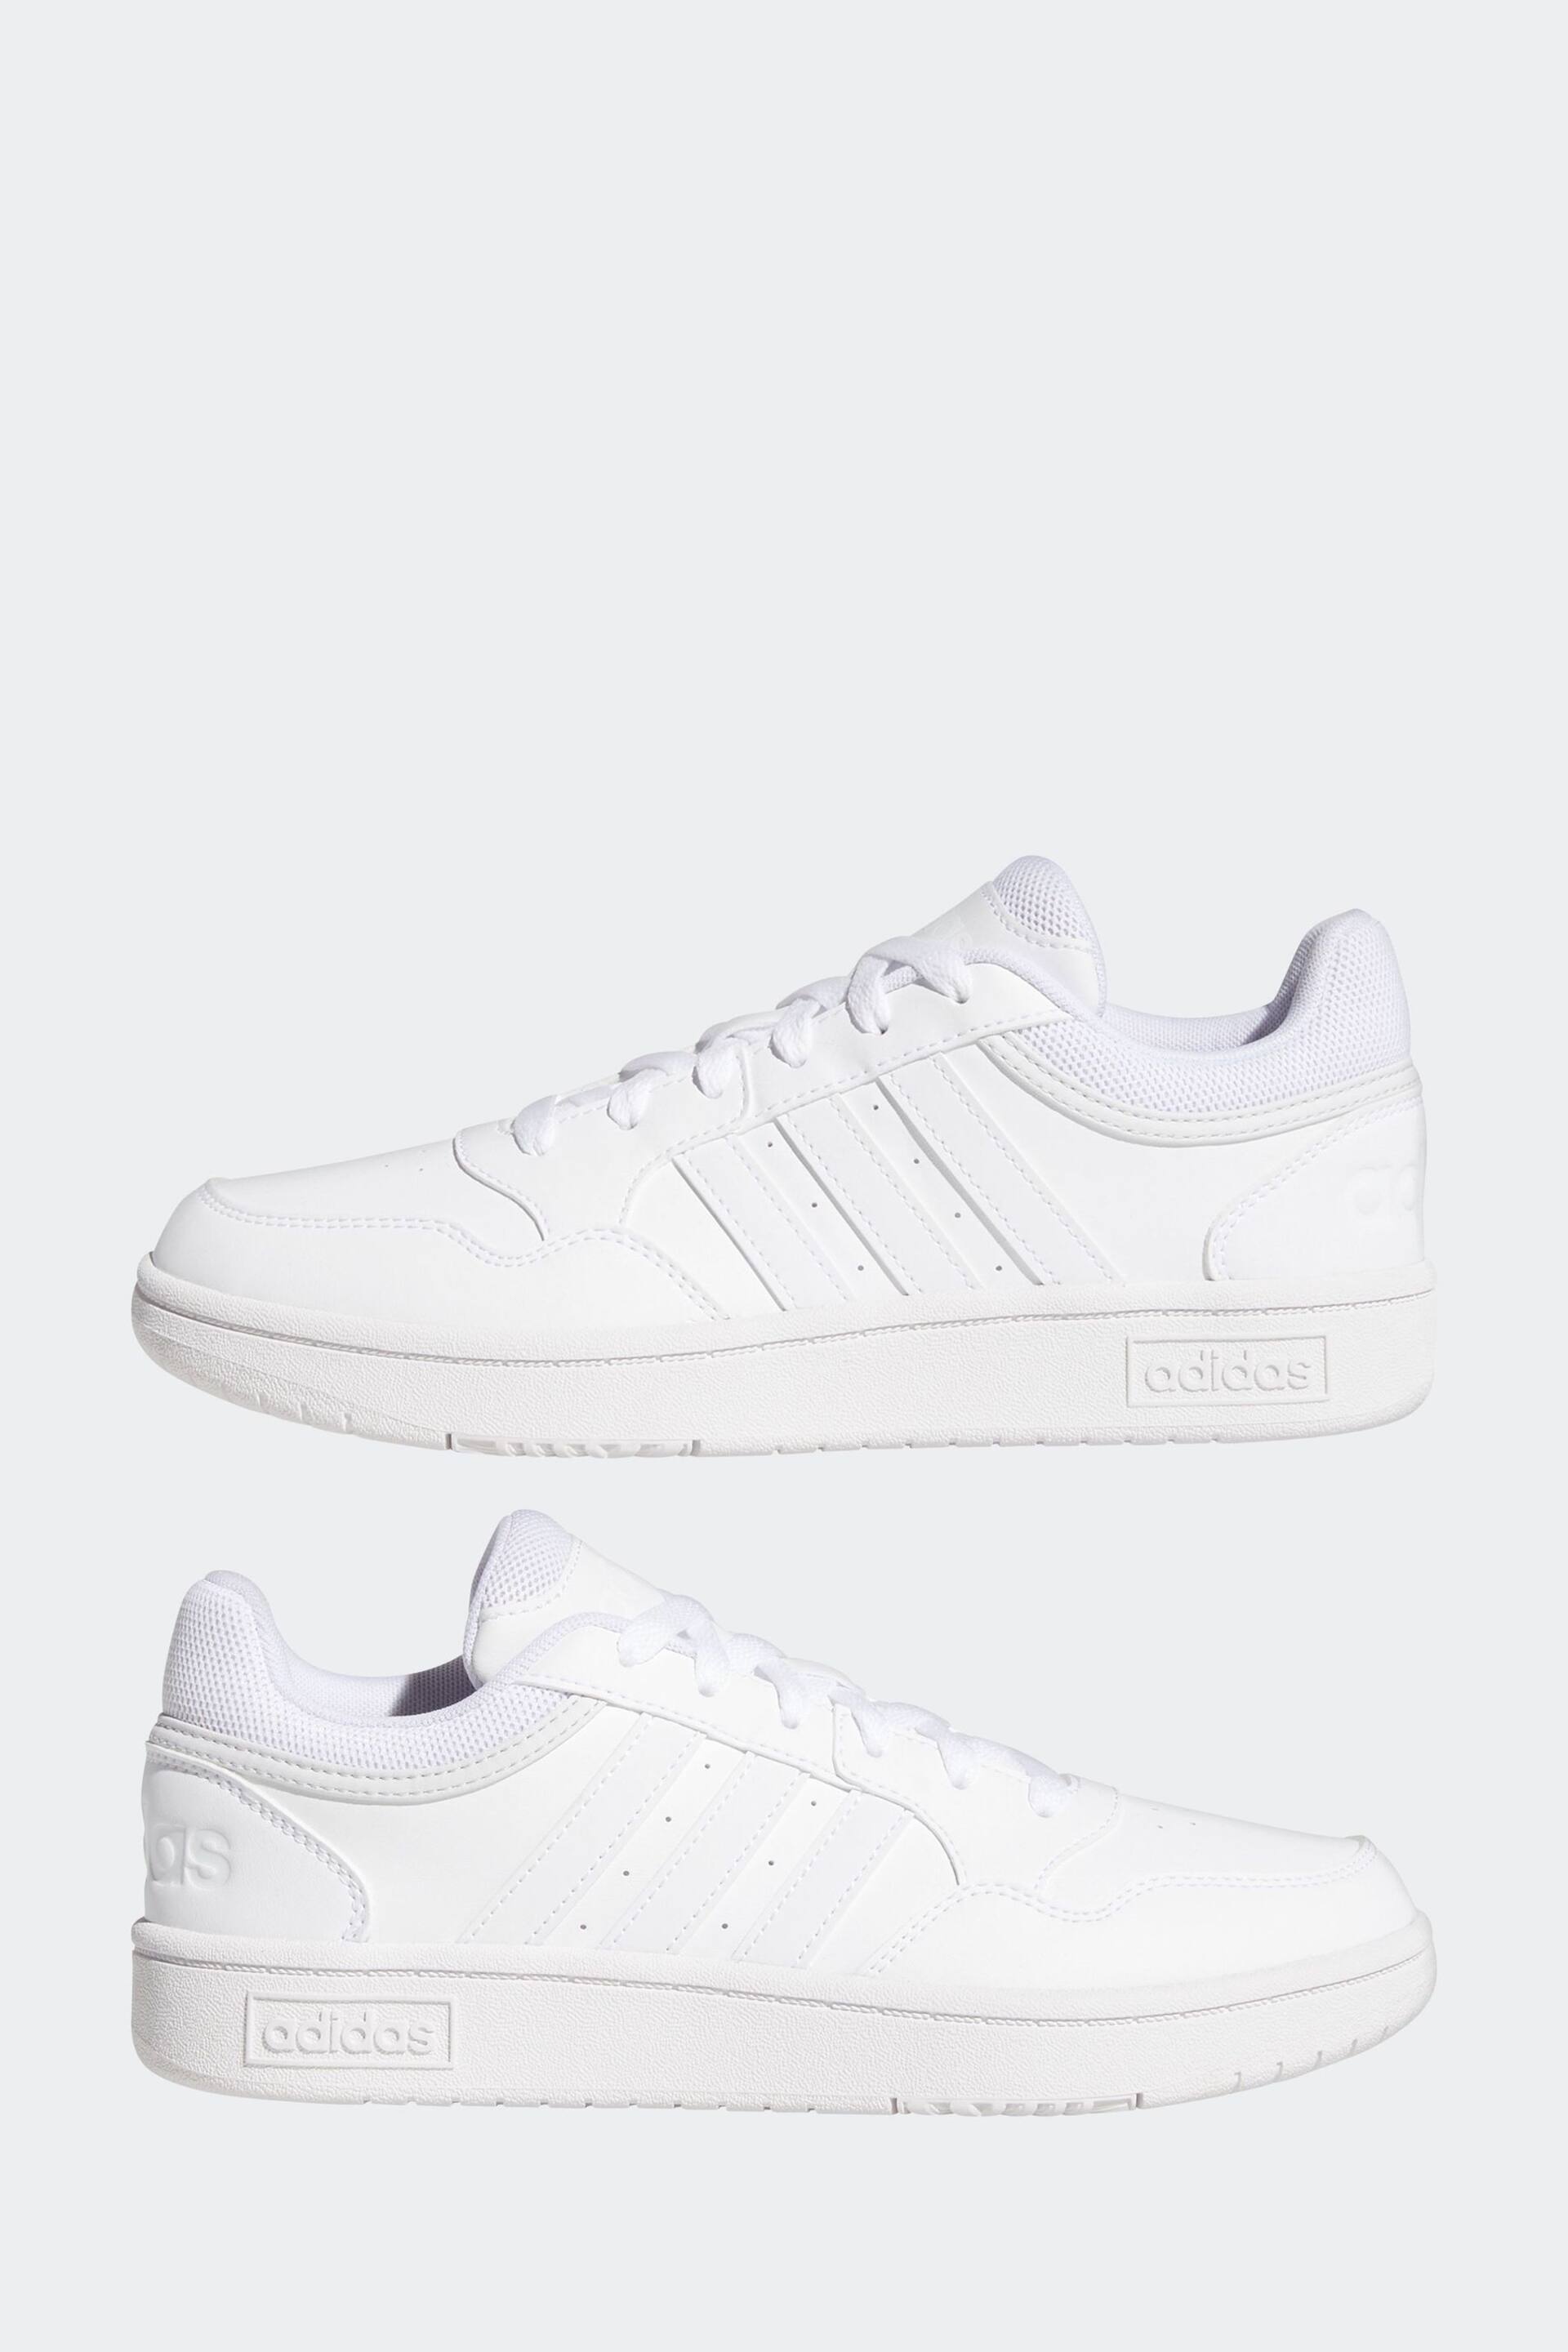 adidas Originals White Hoops 3.0 Low Classic Trainers - Image 6 of 11